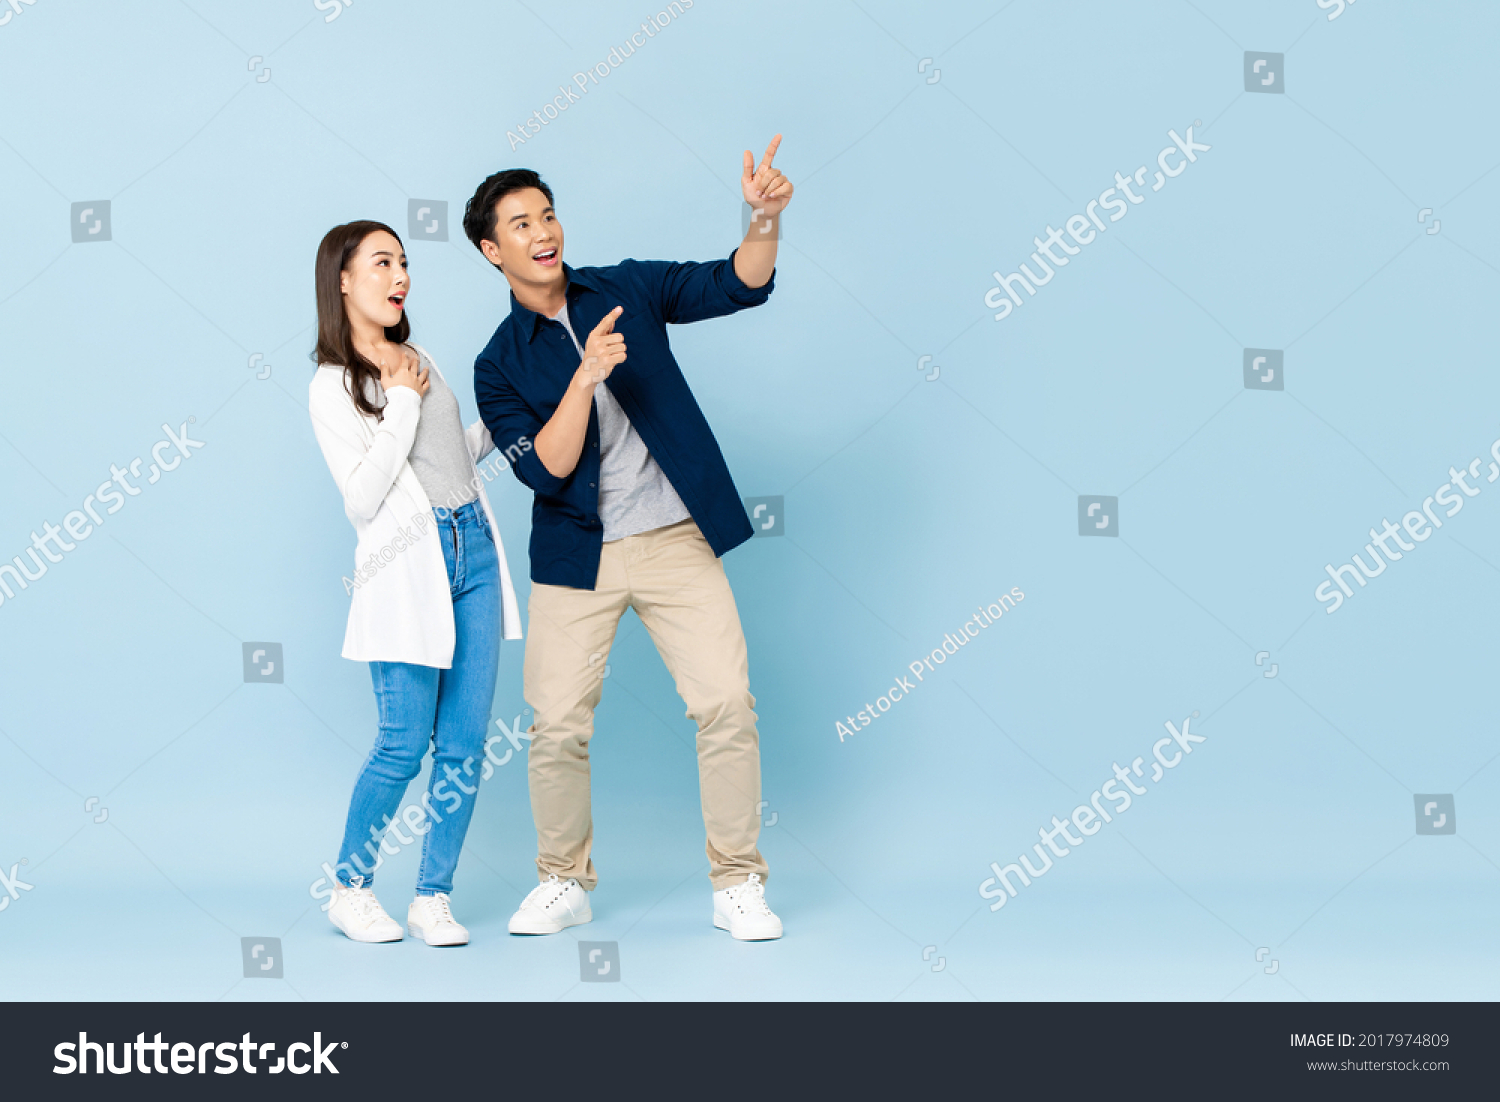 Full length portrait of happy excited Asian couple tourists pointing hands to empty space on isolated light blue background #2017974809